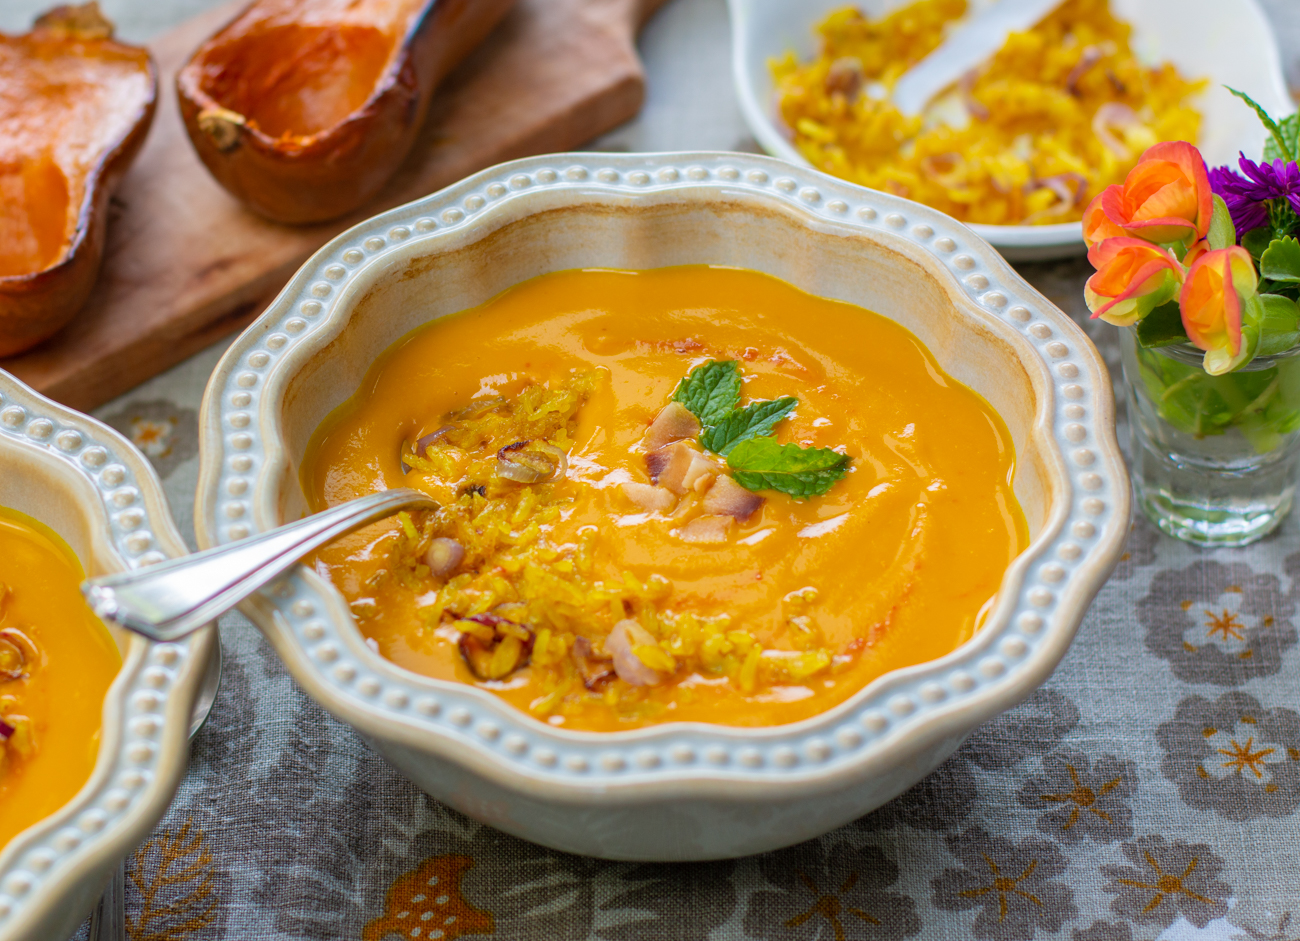 Thai Inspired Honeynut Squash Soup with a Toasted Rice Garnish